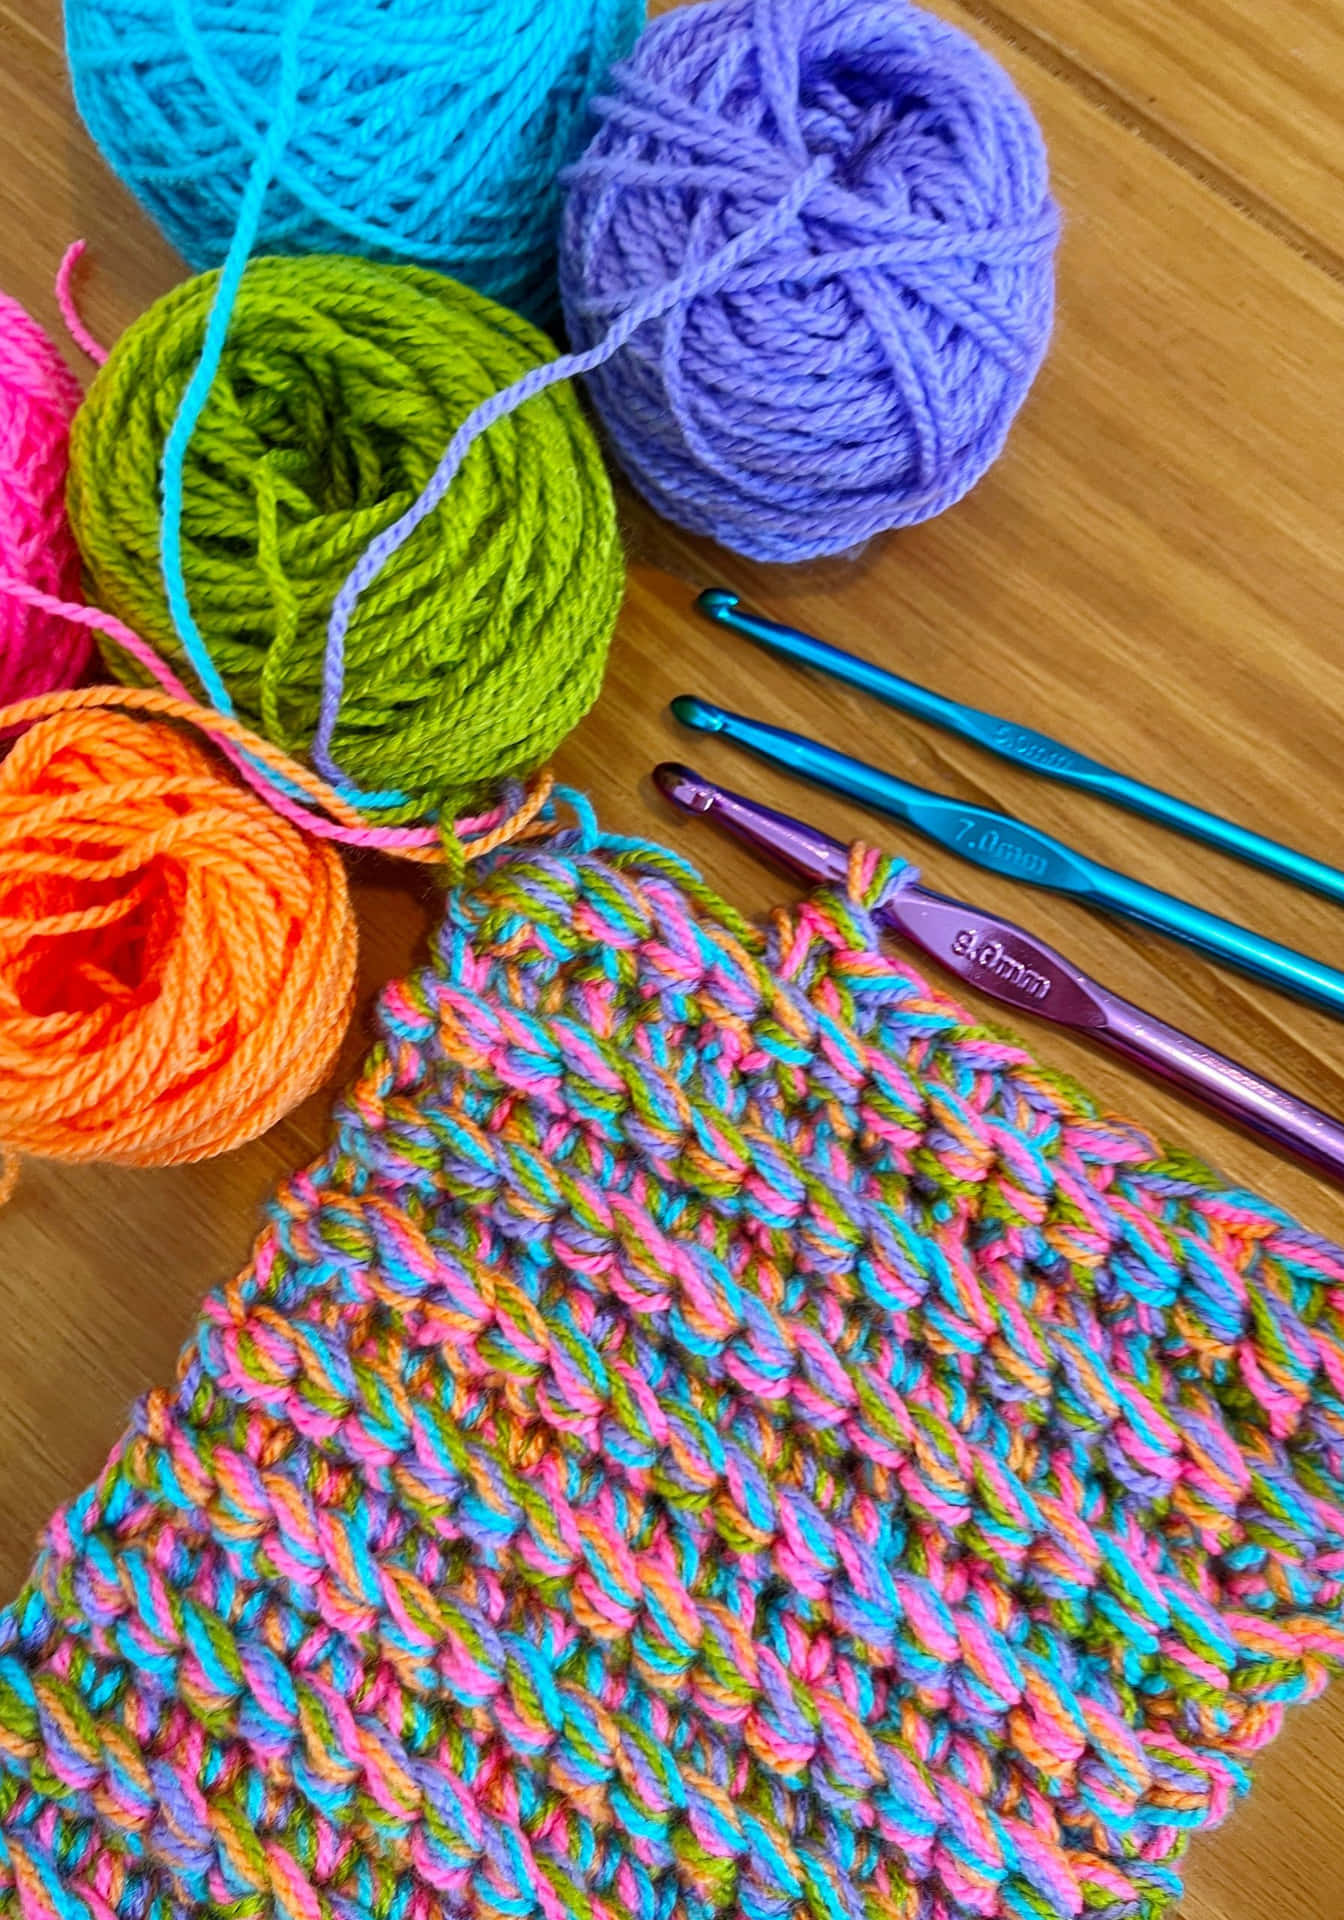 A Colorful Crocheted Bag With Yarn And Knitting Needles